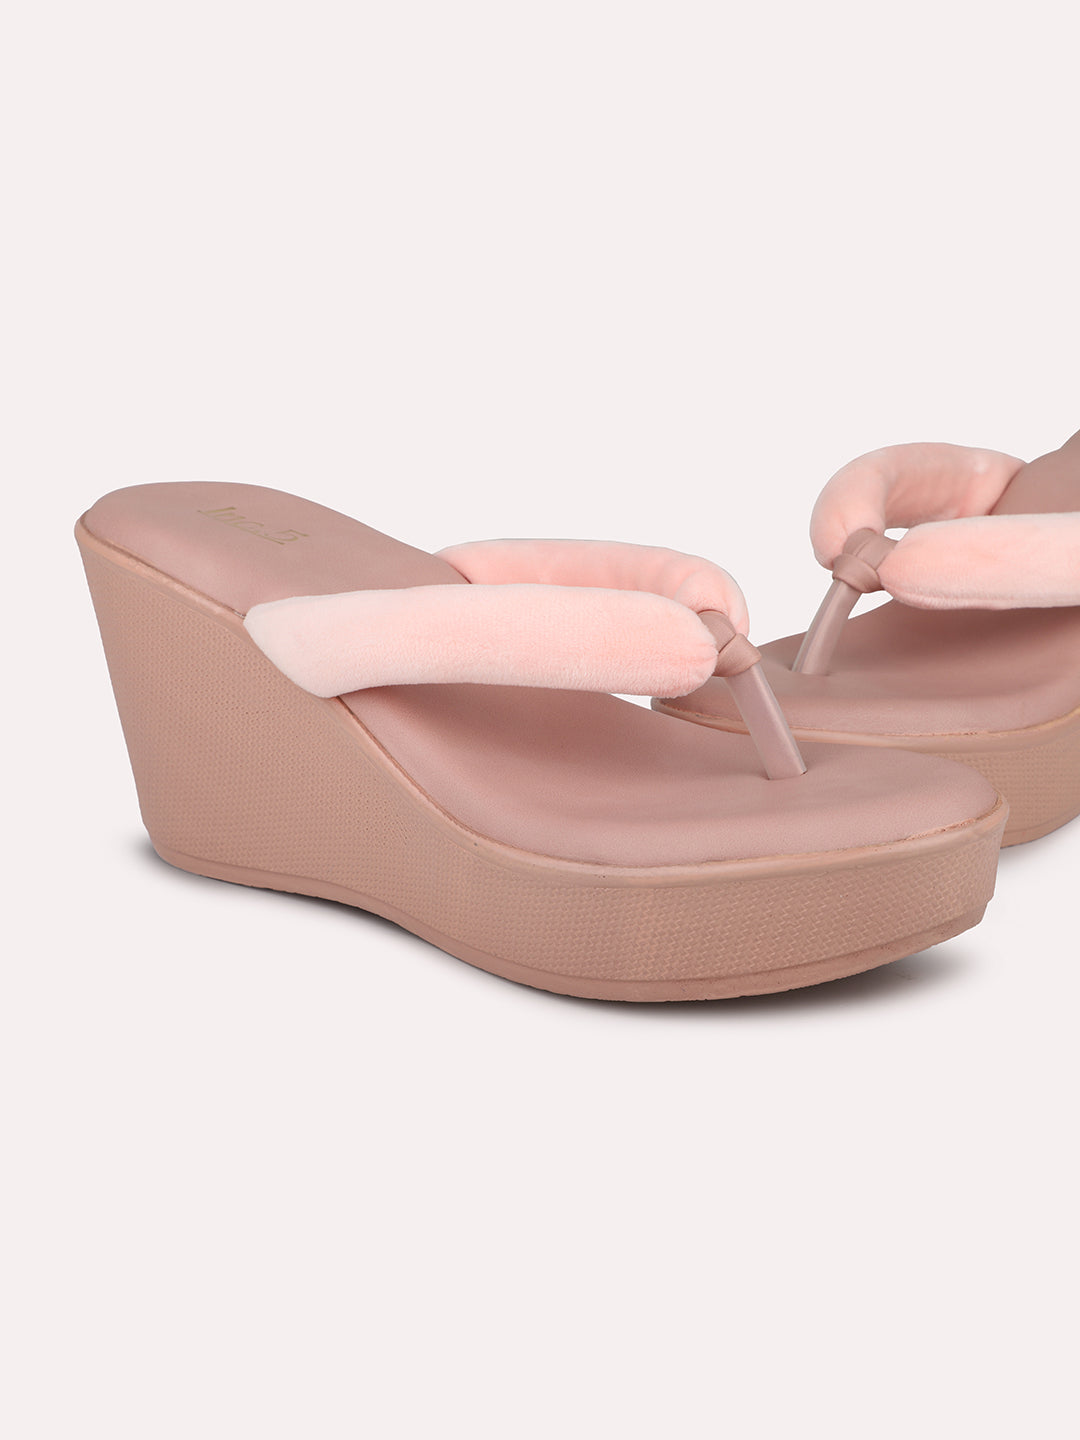 Women Peach Embellished Party Wedges